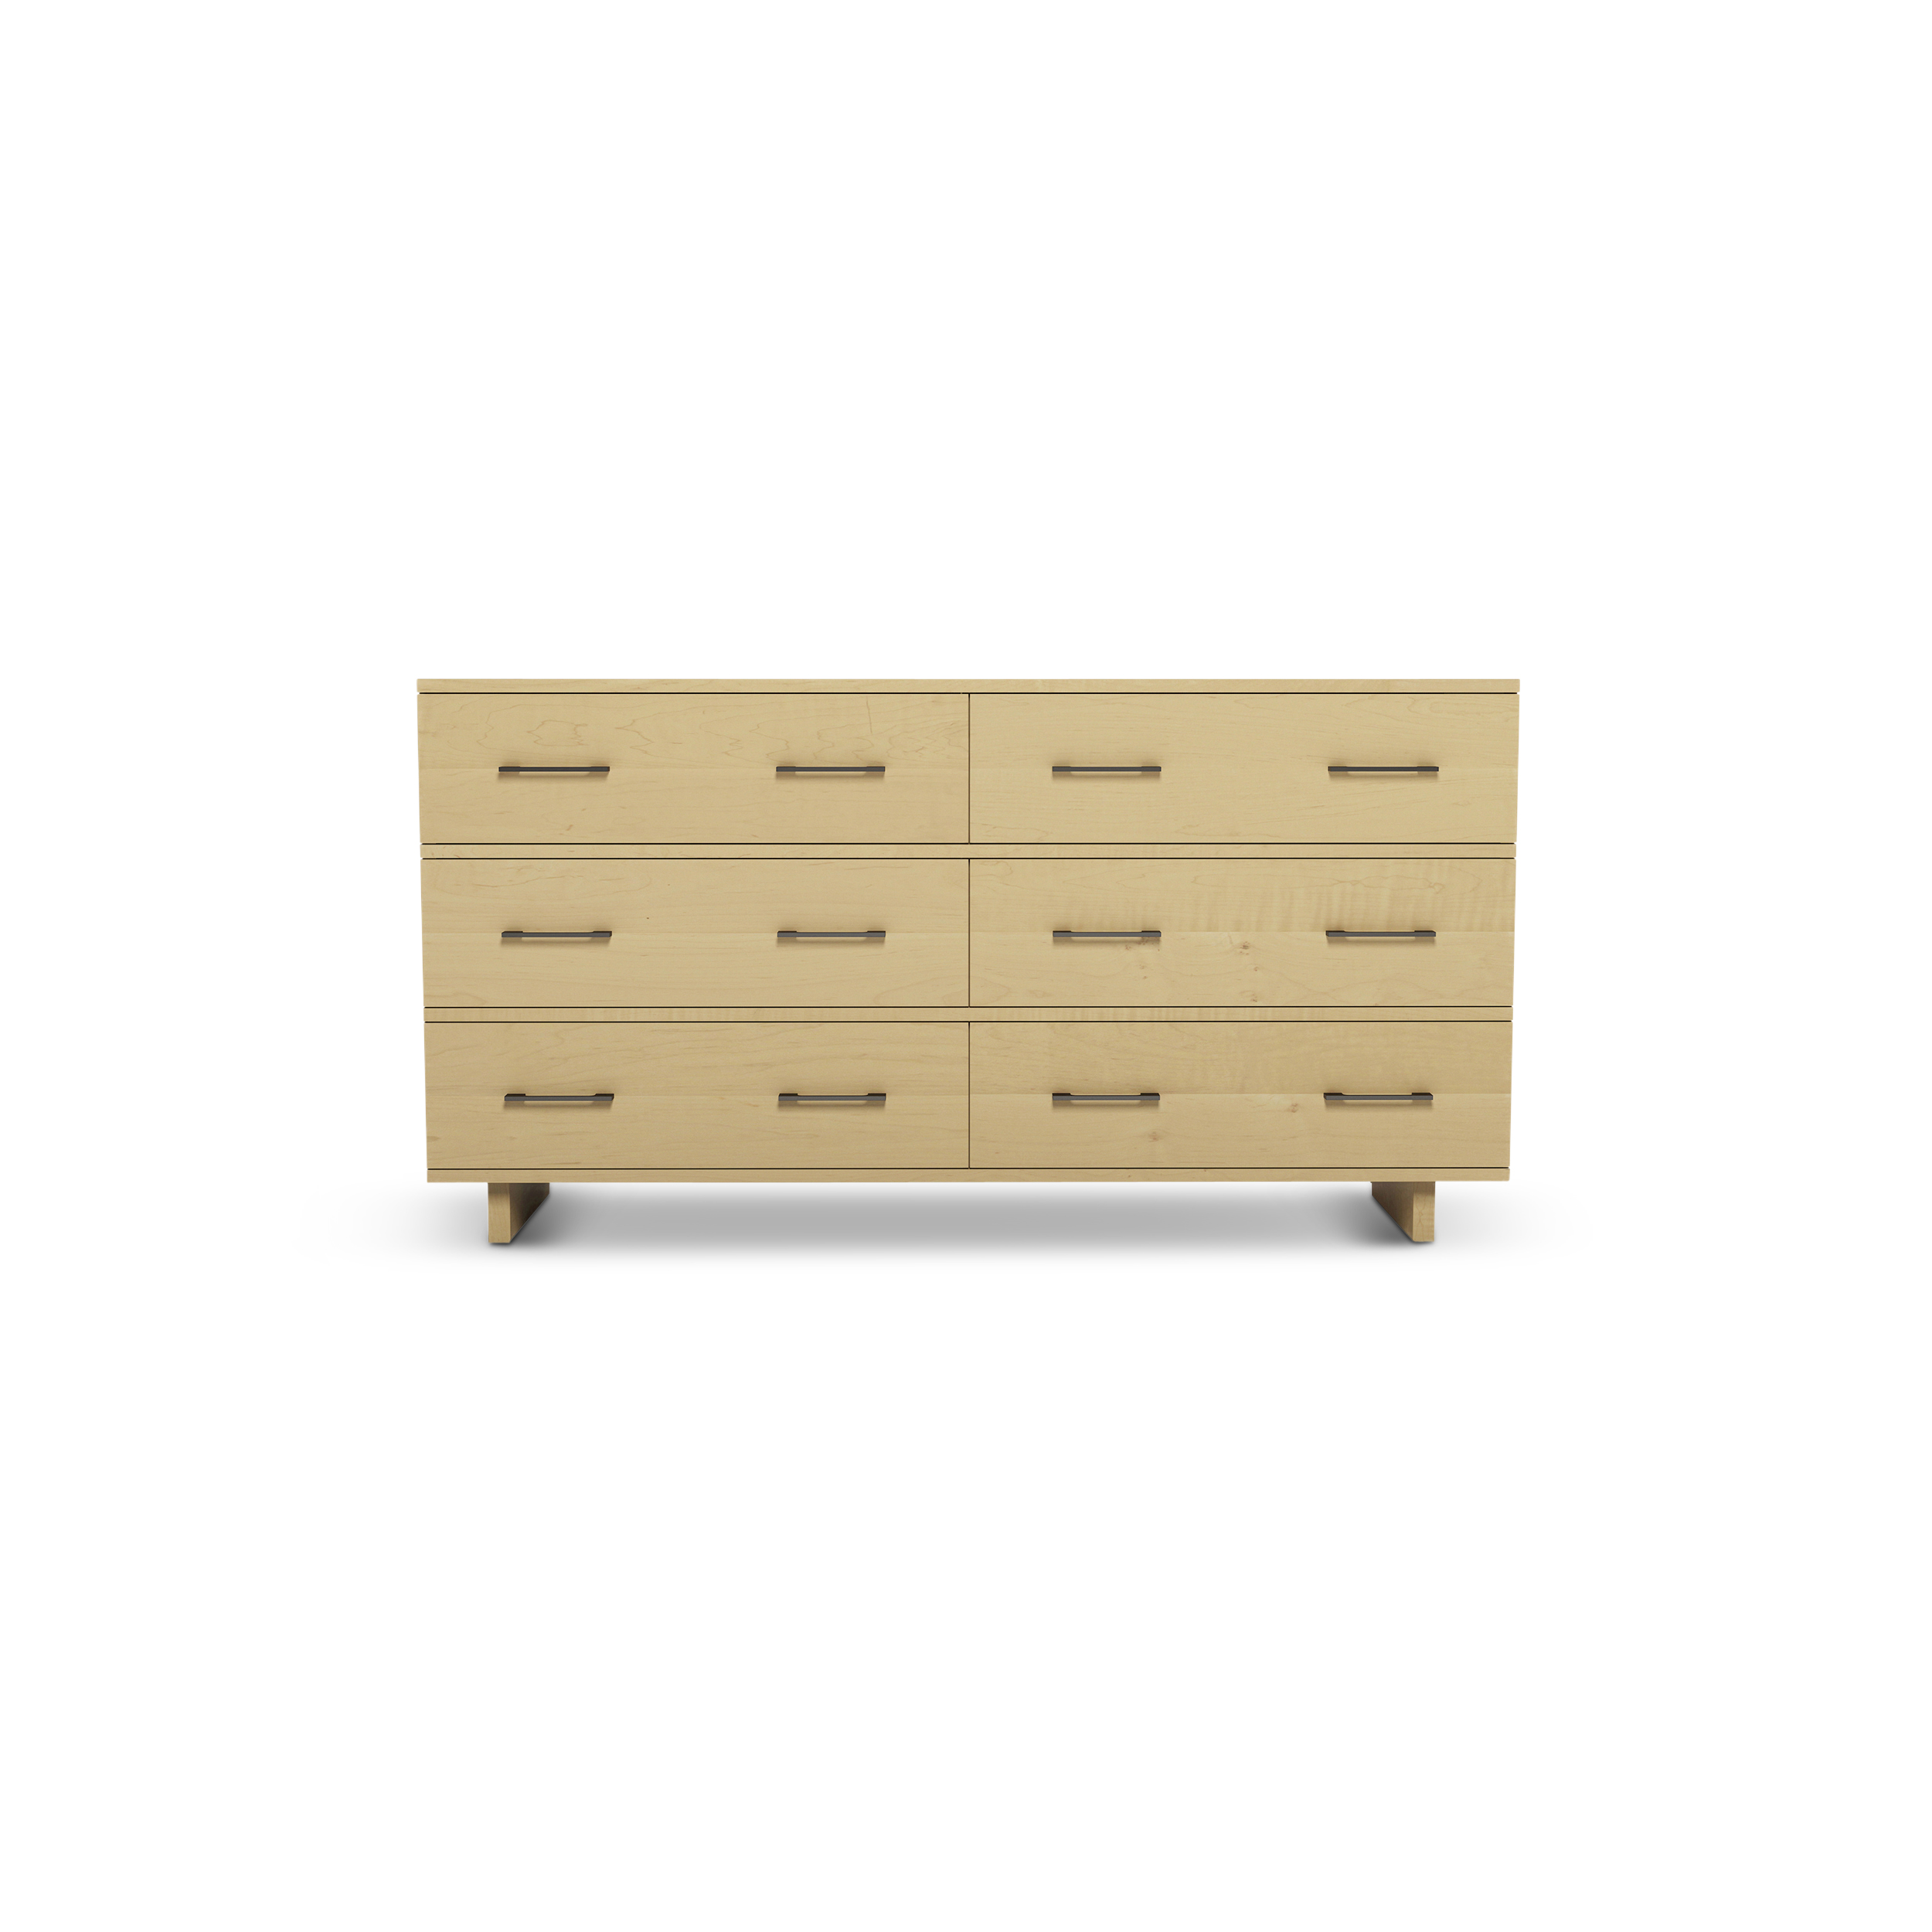 Series 252 Dresser With Six Drawers At 60″ In Width